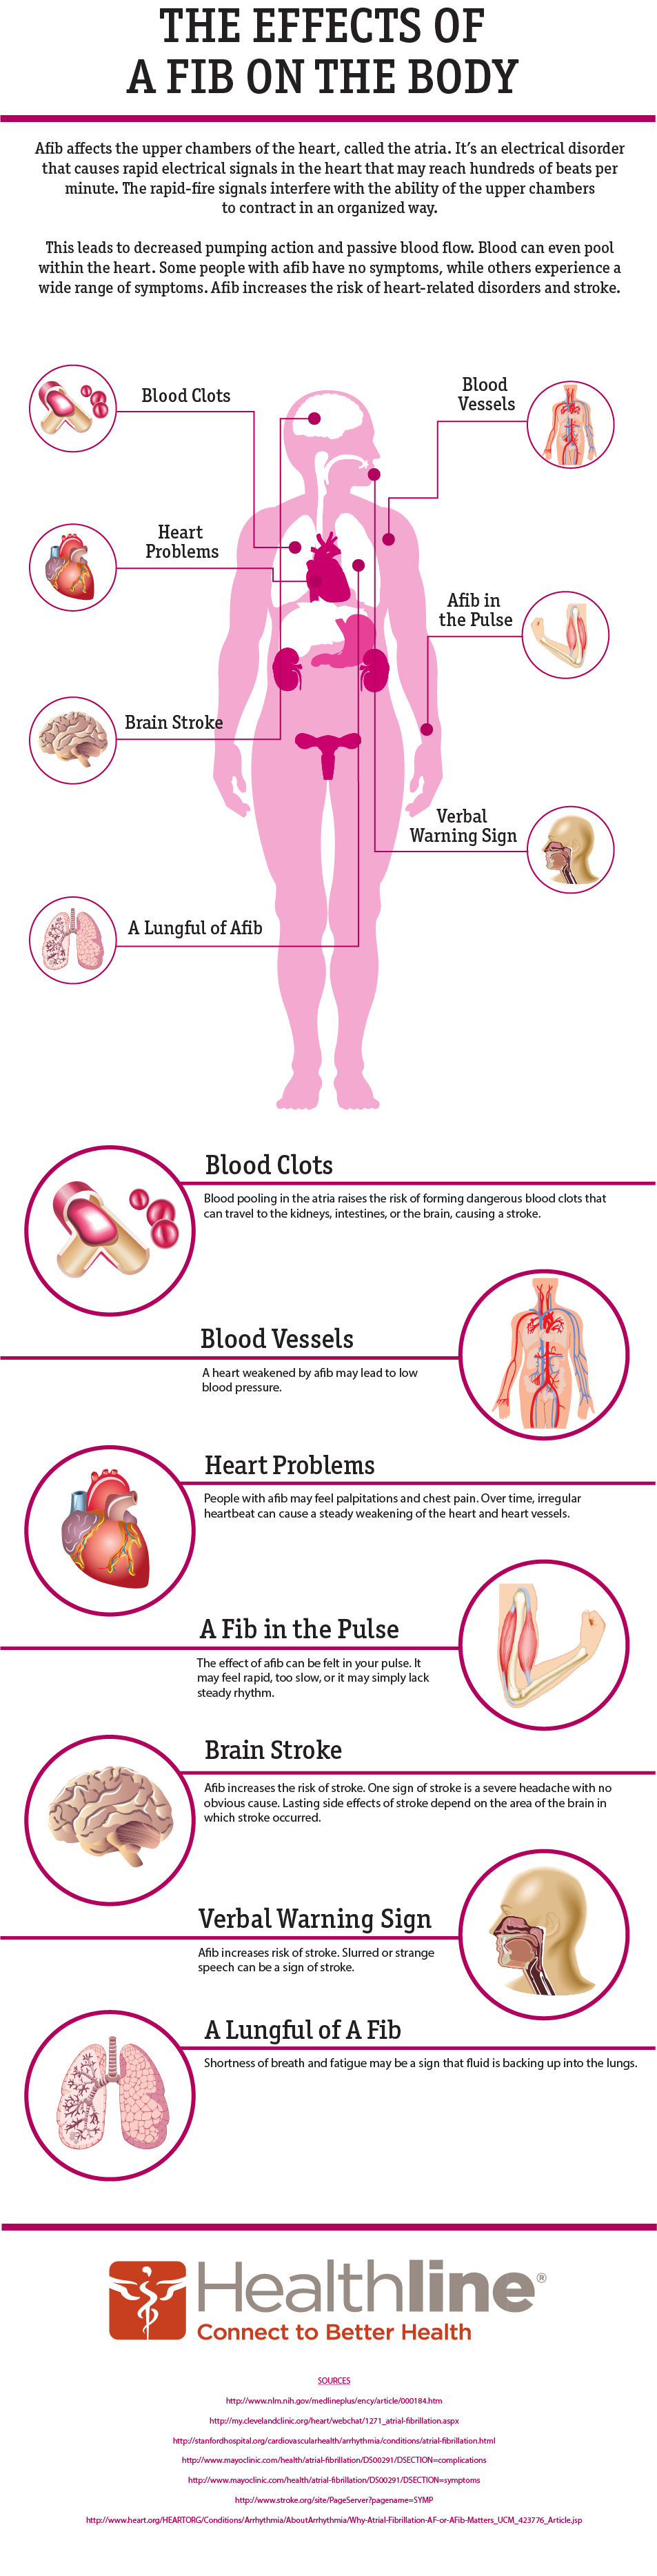 The Effects of Afib on the Body